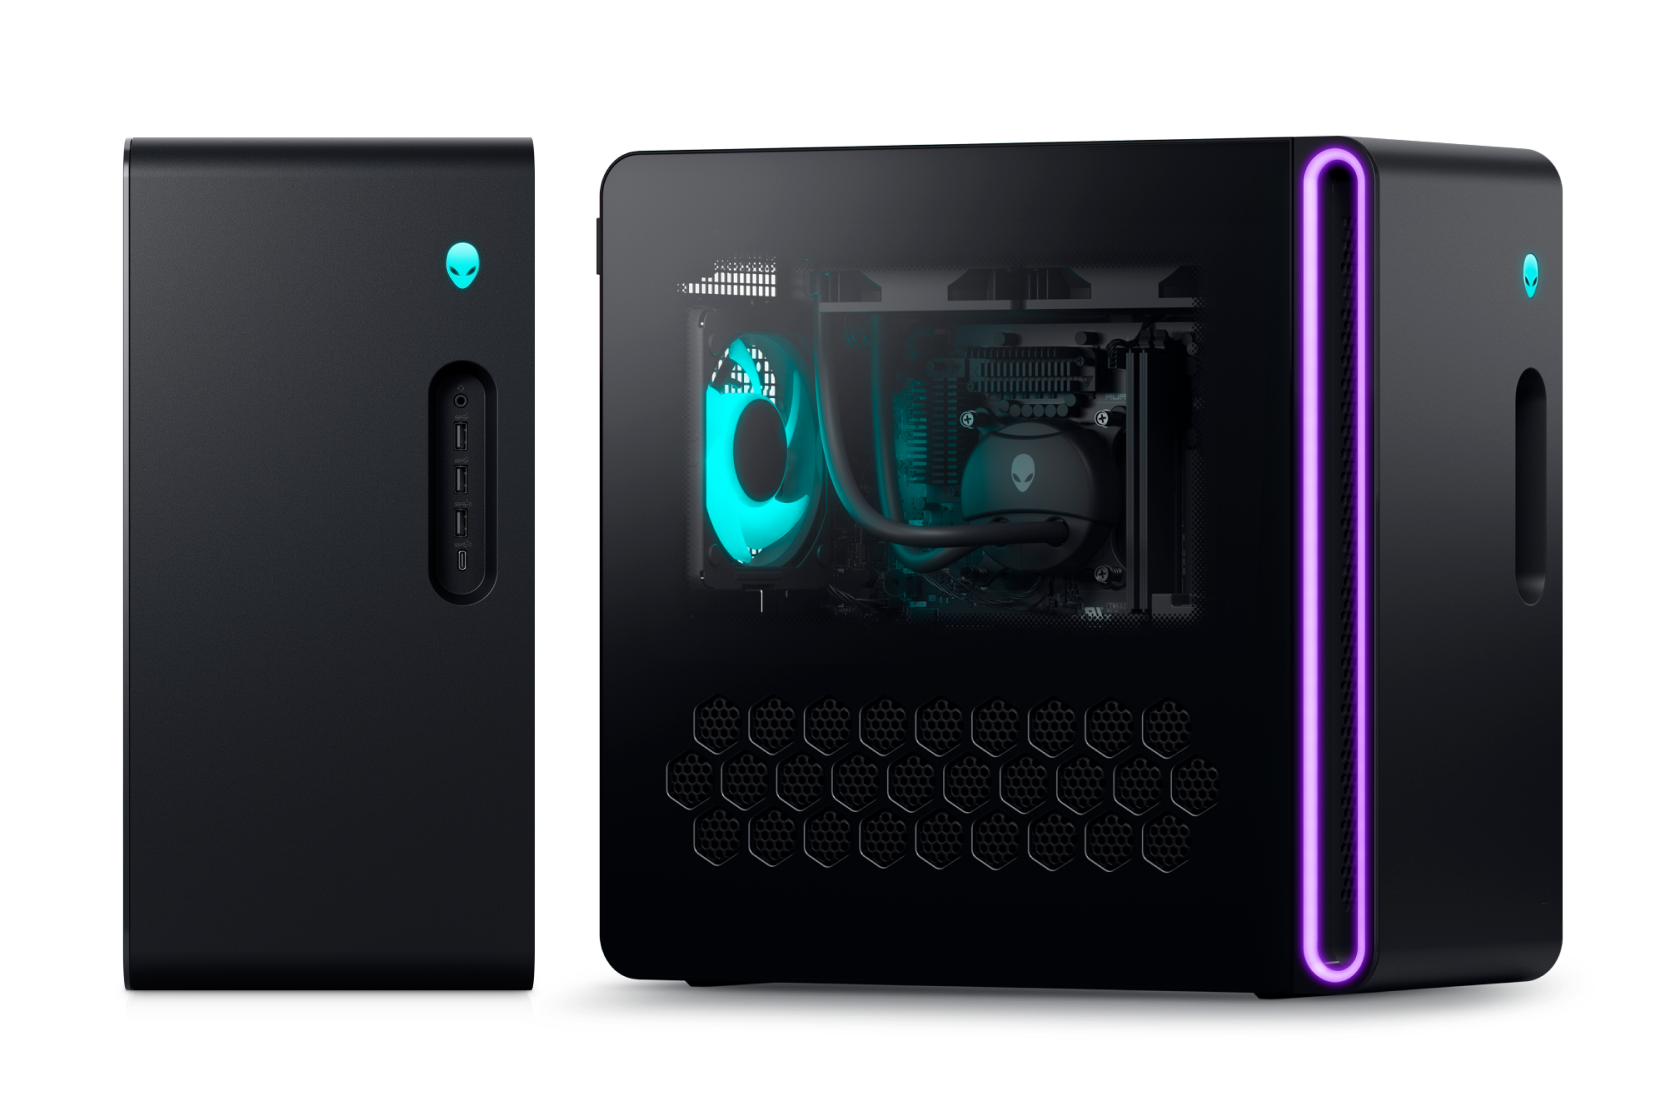 Front and three-quarter views of the Alienware Aurora with illuminated lighting zones.